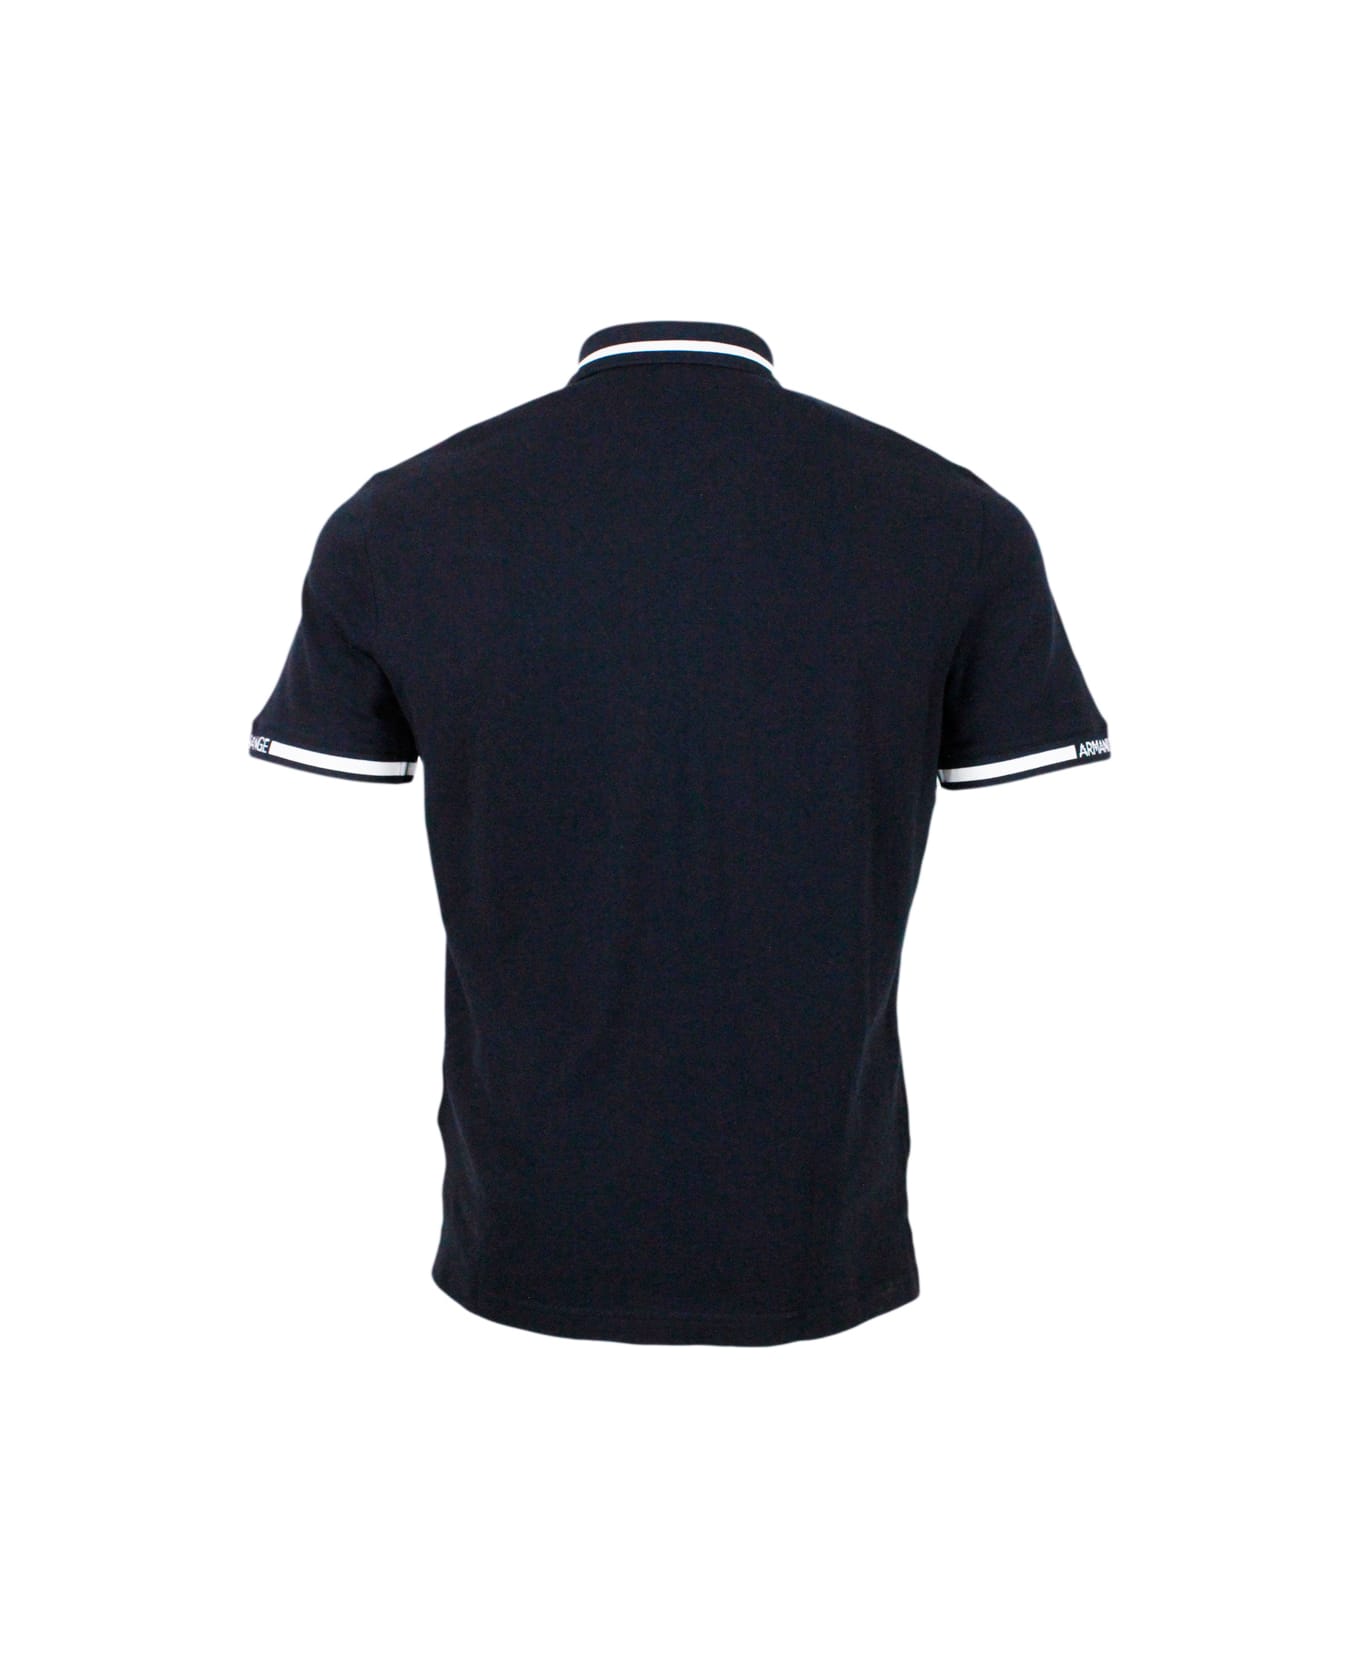 Armani Collezioni Hort-sleeved Pique Cotton Polo Shirt With Zip Closure And Writing On The Collar - Blue